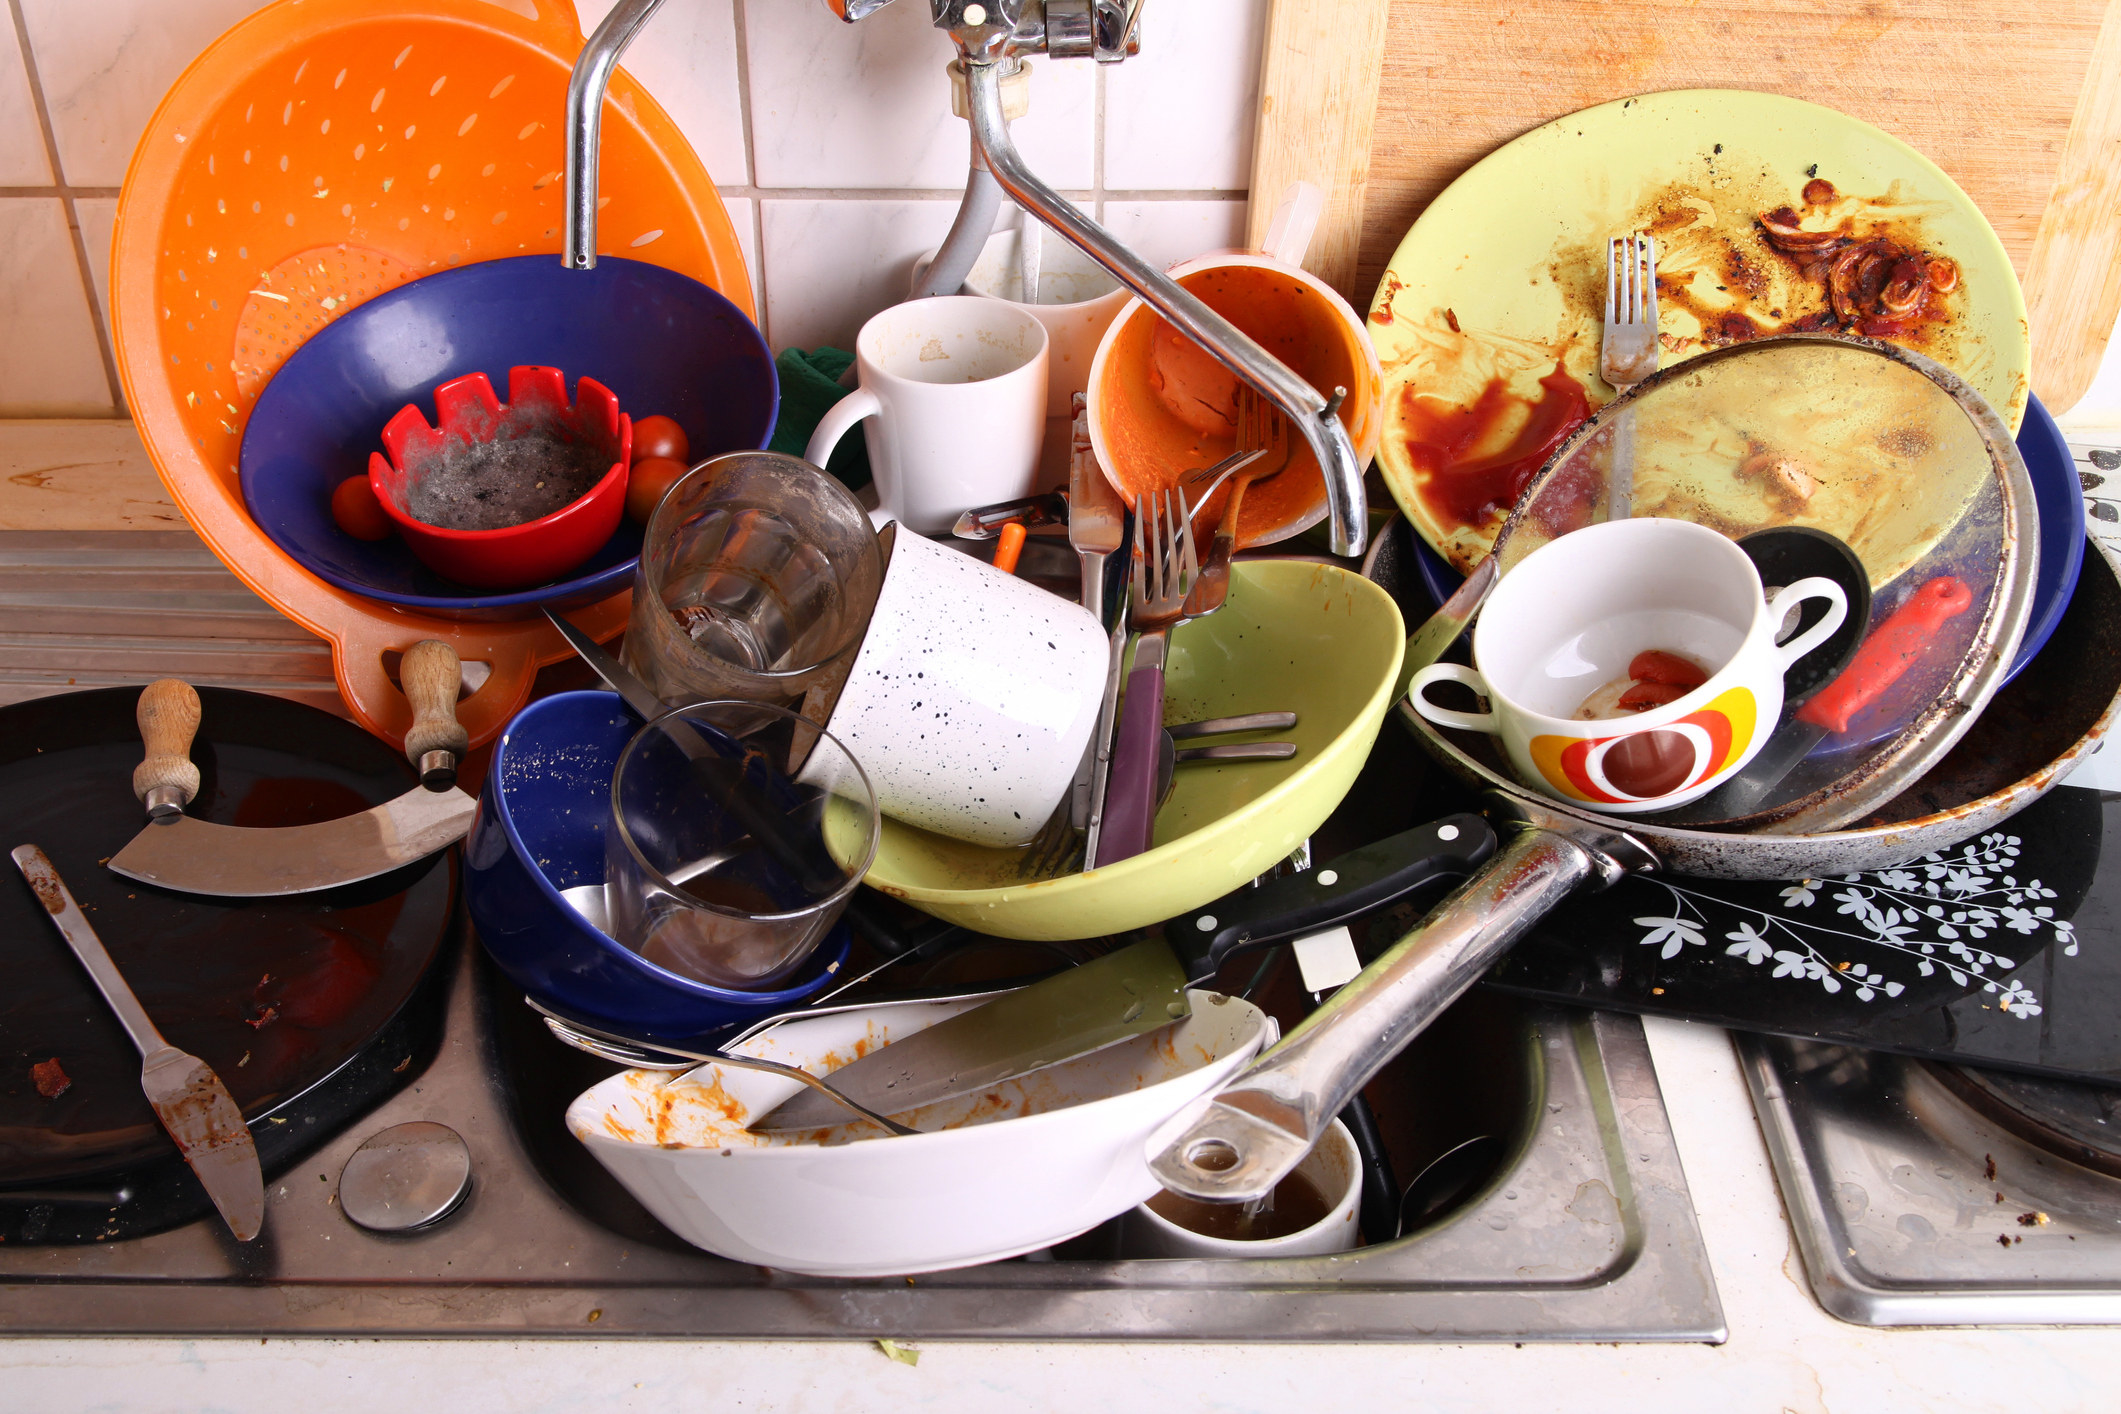 Huge pile of dirty pots, pans, cups, and dishes in the sink waiting to be washed